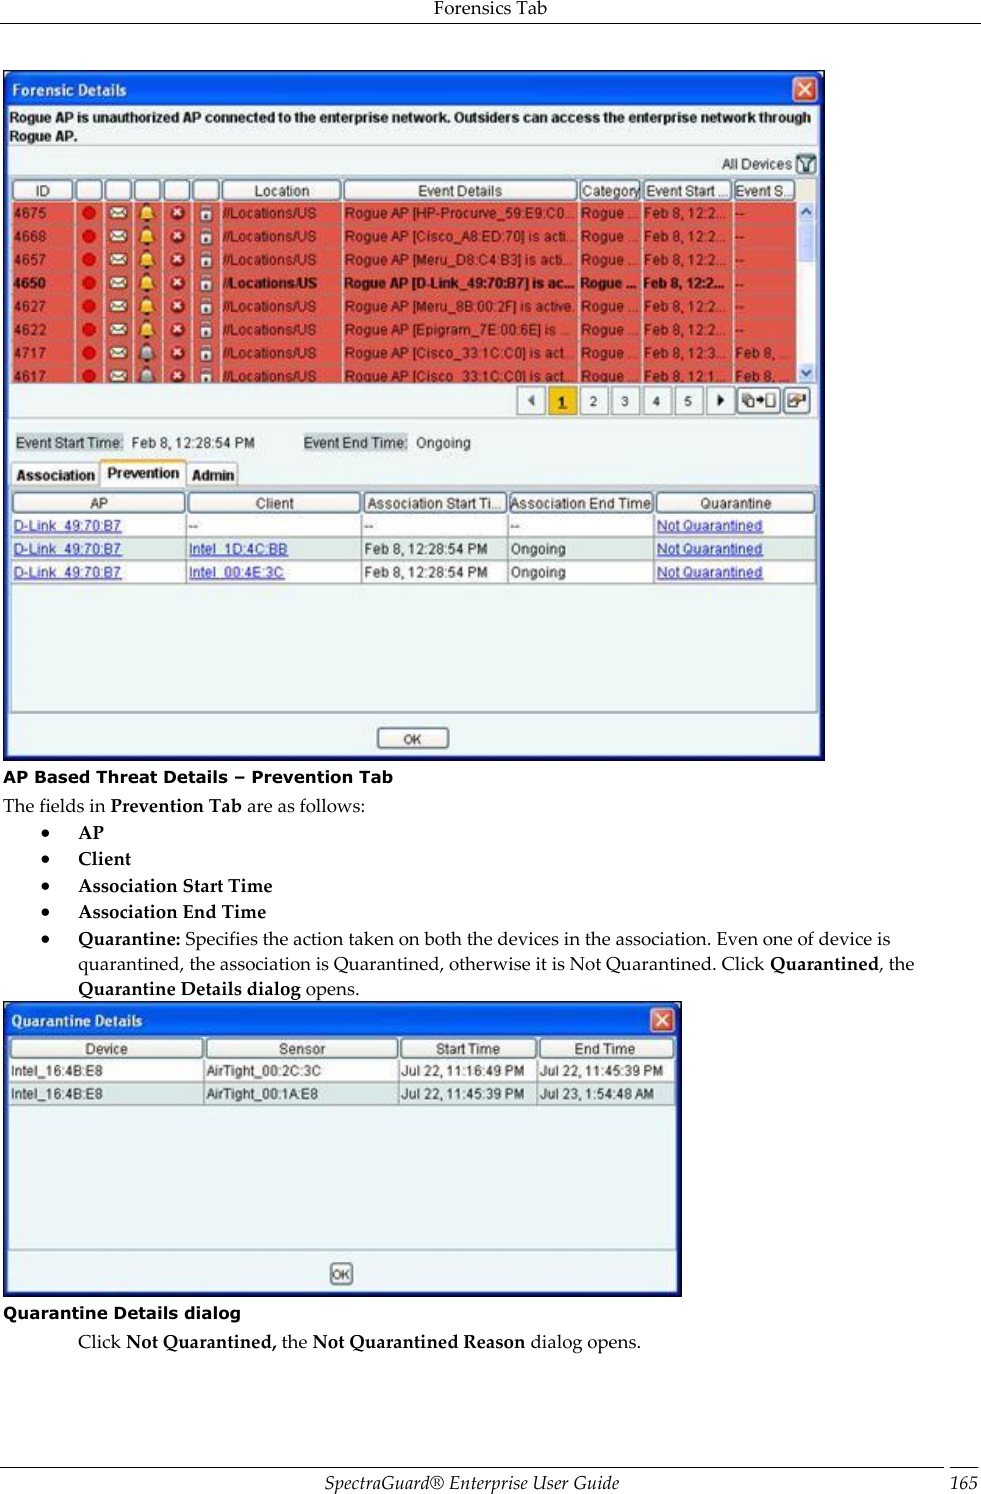 Forensics Tab SpectraGuard®  Enterprise User Guide 165  AP Based Threat Details – Prevention Tab The fields in Prevention Tab are as follows:  AP  Client  Association Start Time  Association End Time  Quarantine: Specifies the action taken on both the devices in the association. Even one of device is quarantined, the association is Quarantined, otherwise it is Not Quarantined. Click Quarantined, the Quarantine Details dialog opens.  Quarantine Details dialog Click Not Quarantined, the Not Quarantined Reason dialog opens. 